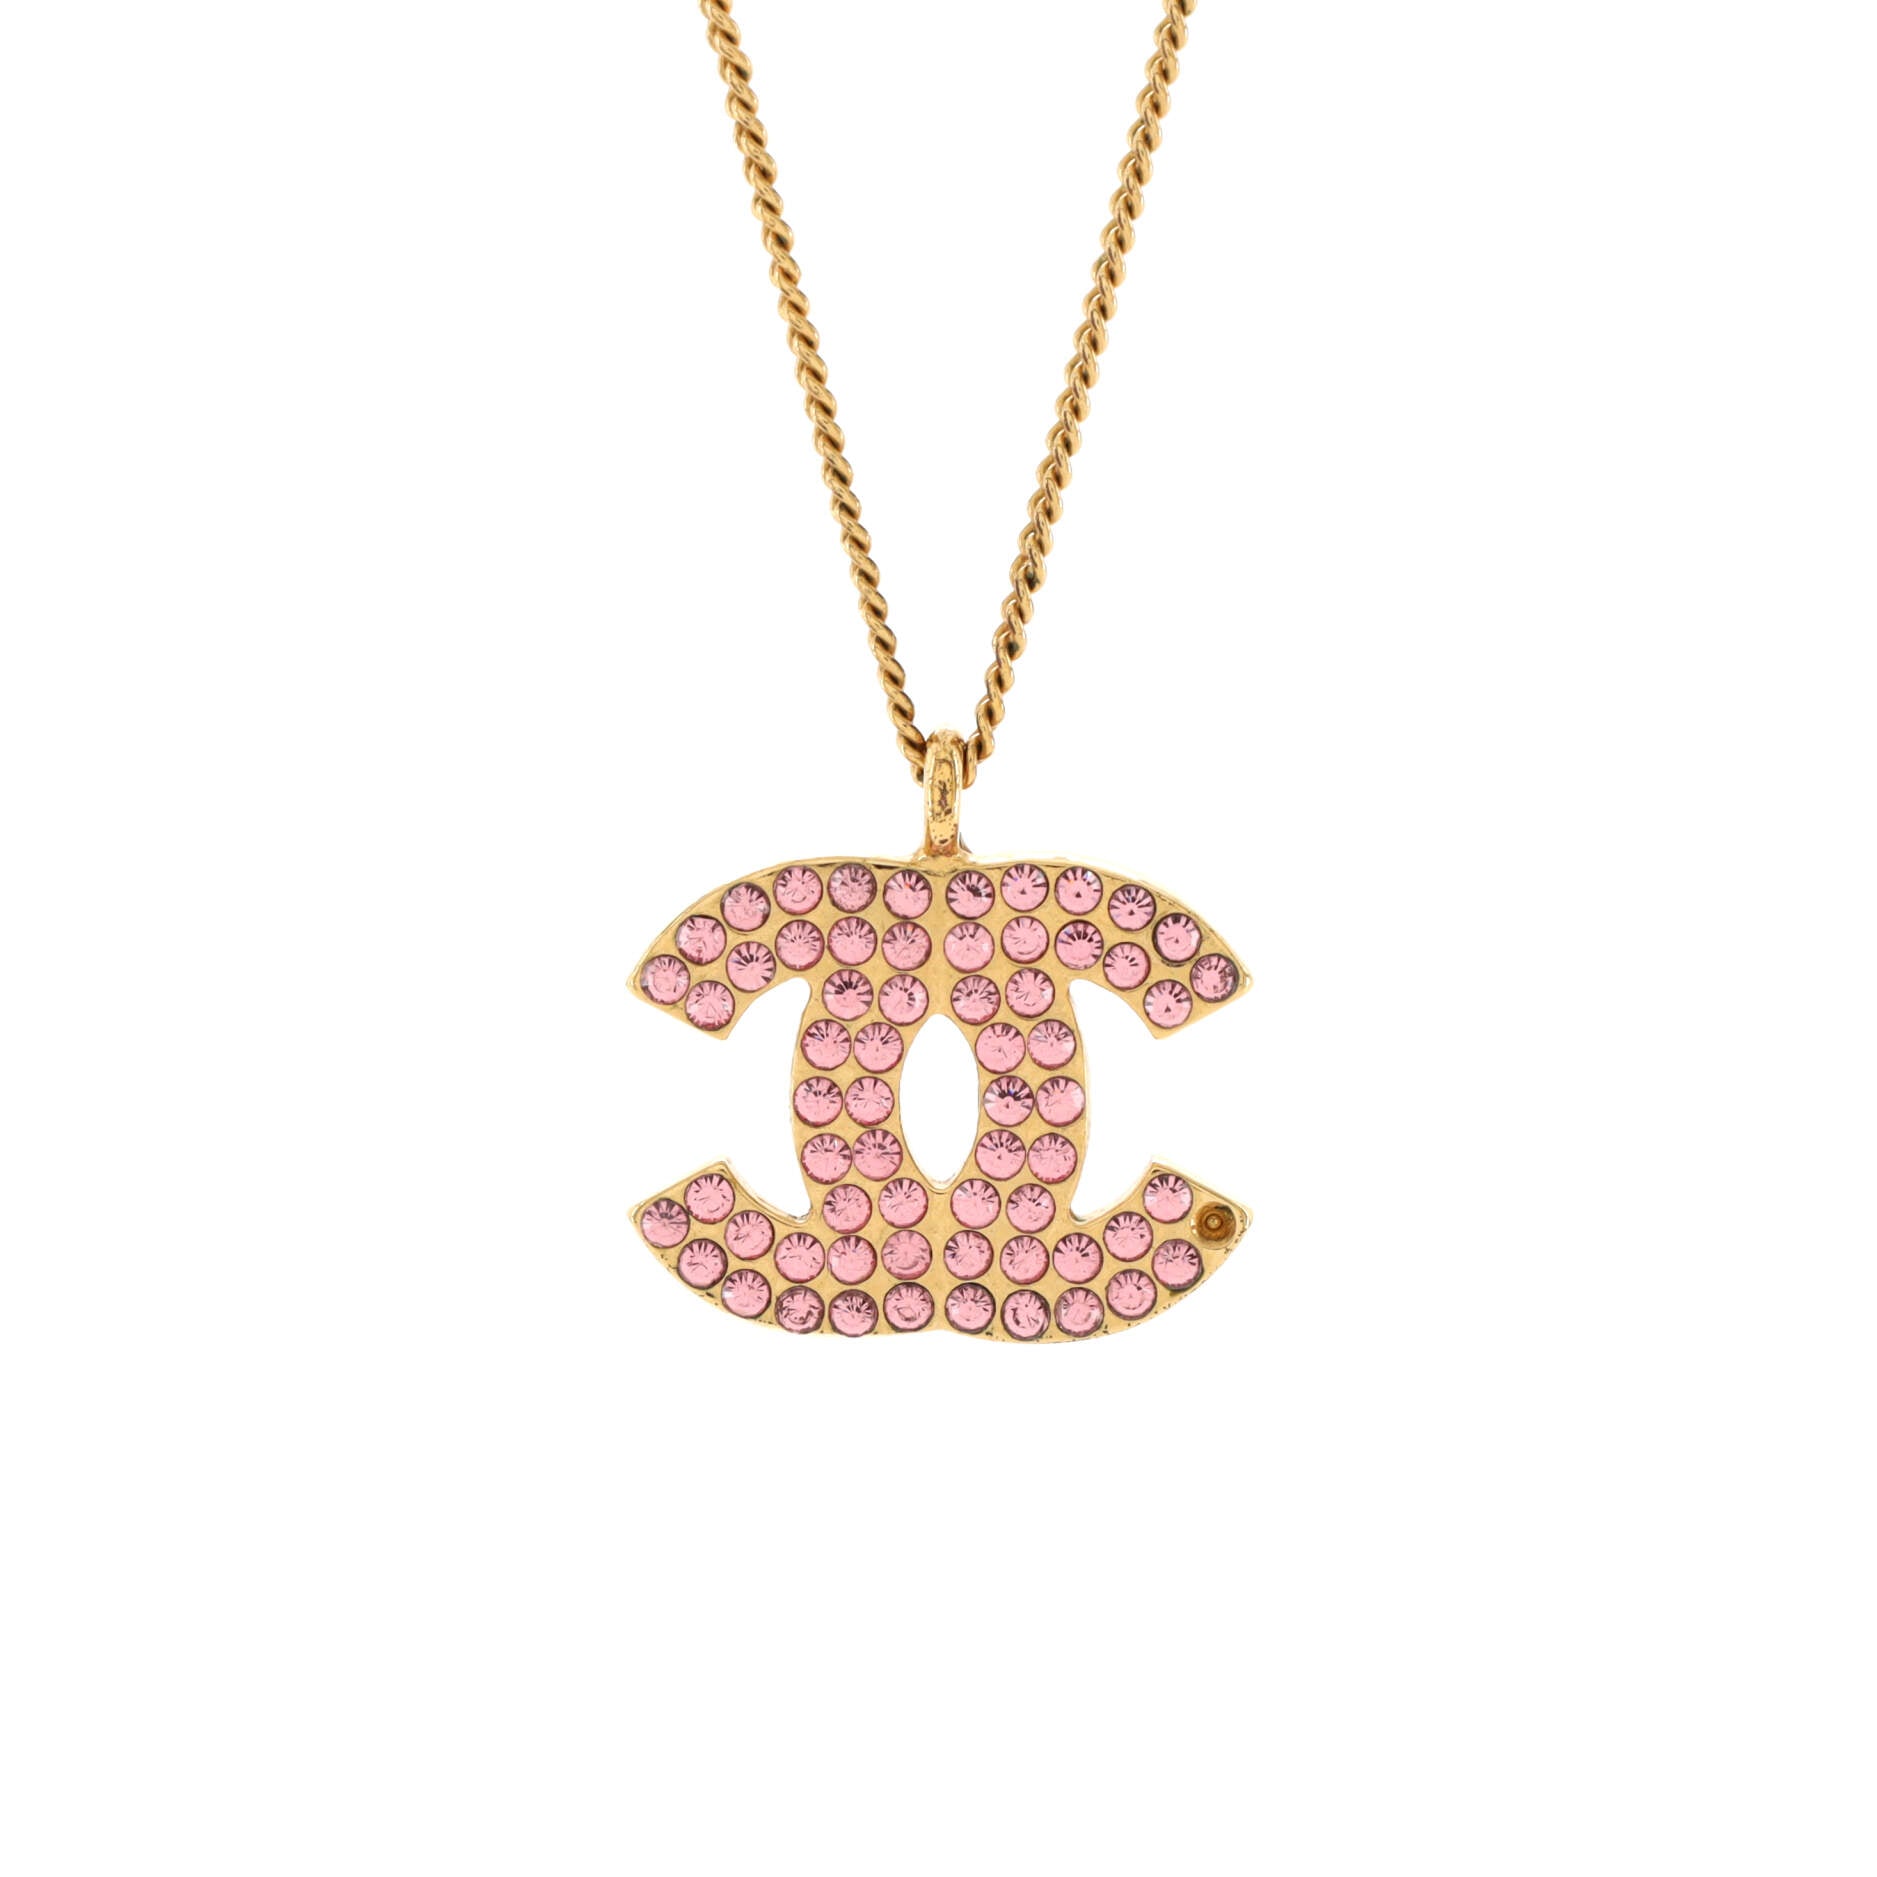 CHANEL Pre-Owned 1995 CC Rhinestone-Embellished Chain Necklace